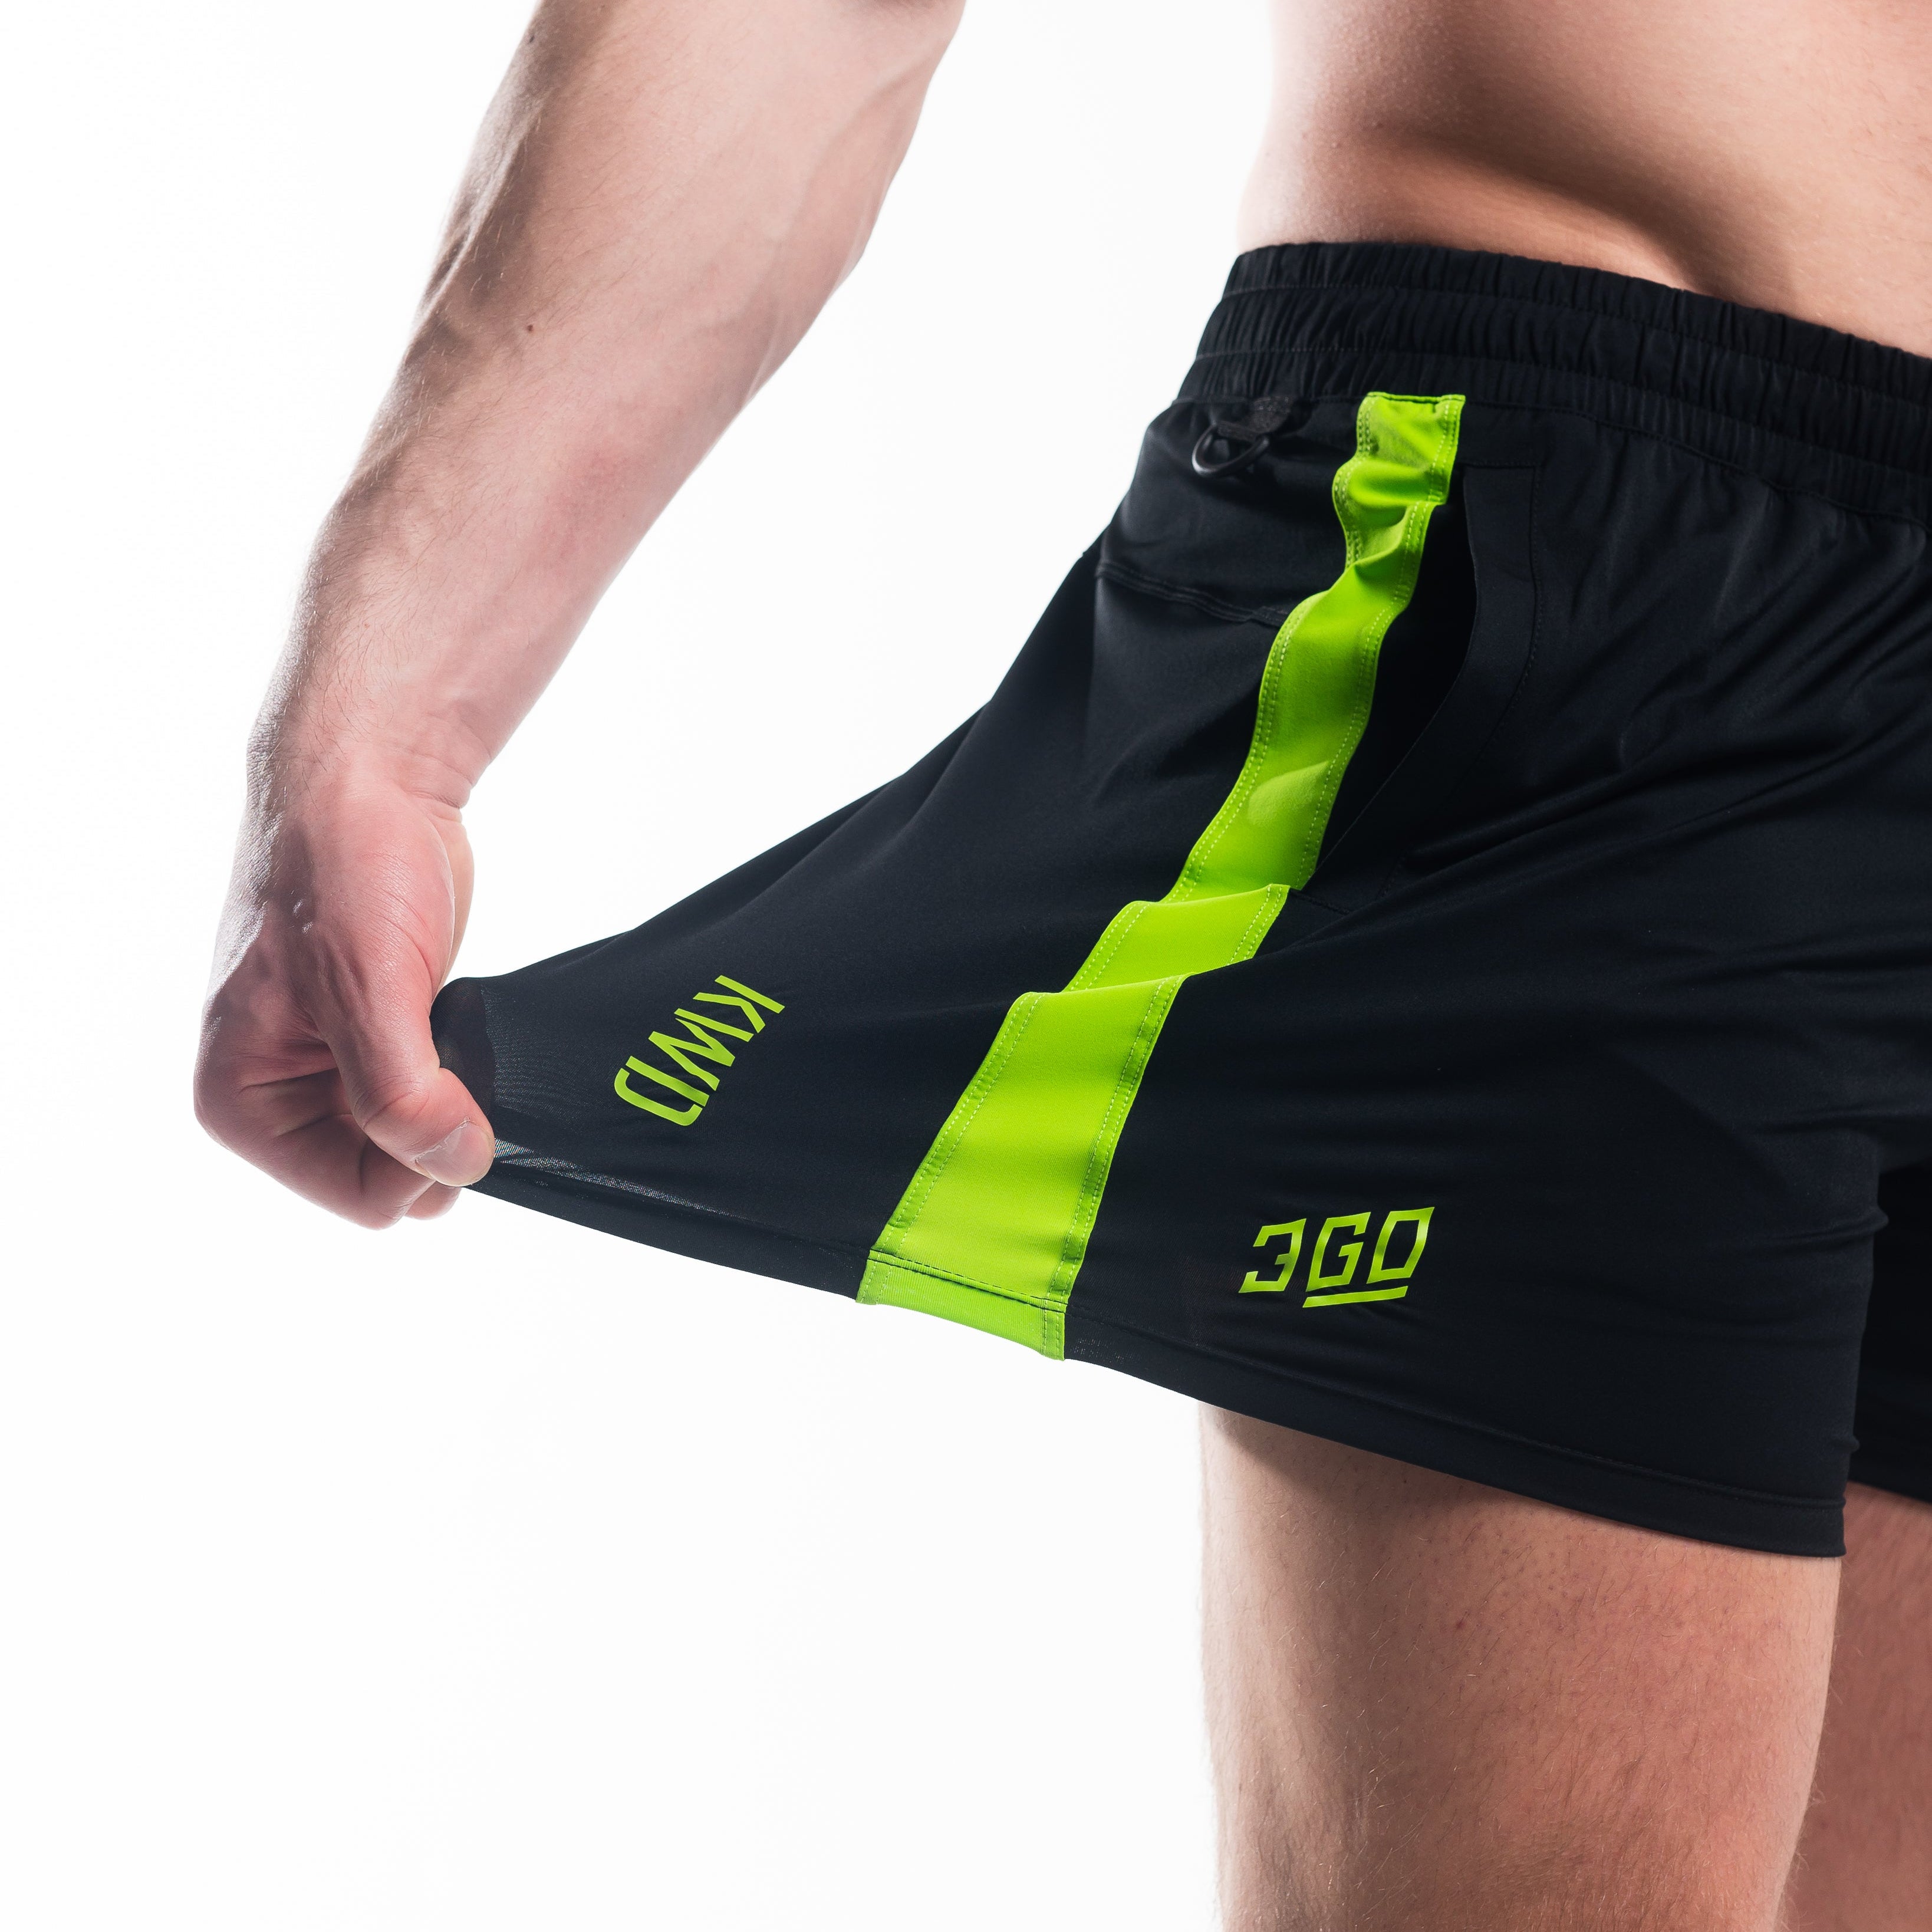 360GO was created to provide the flexibility for all movements in your training while offering comfort. These shorts offer 360 degrees of stretch in all angles and allow you to remain comfortable without limiting any movement in both training and life environments. Designed with a wide drawstring to easily adjust your waist without slipping. Purchase 360GO KWD shorts from A7 Europe. Genouillères powerlifting shipping to France, Spain, Ireland, Germany, Italy, Sweden and EU.